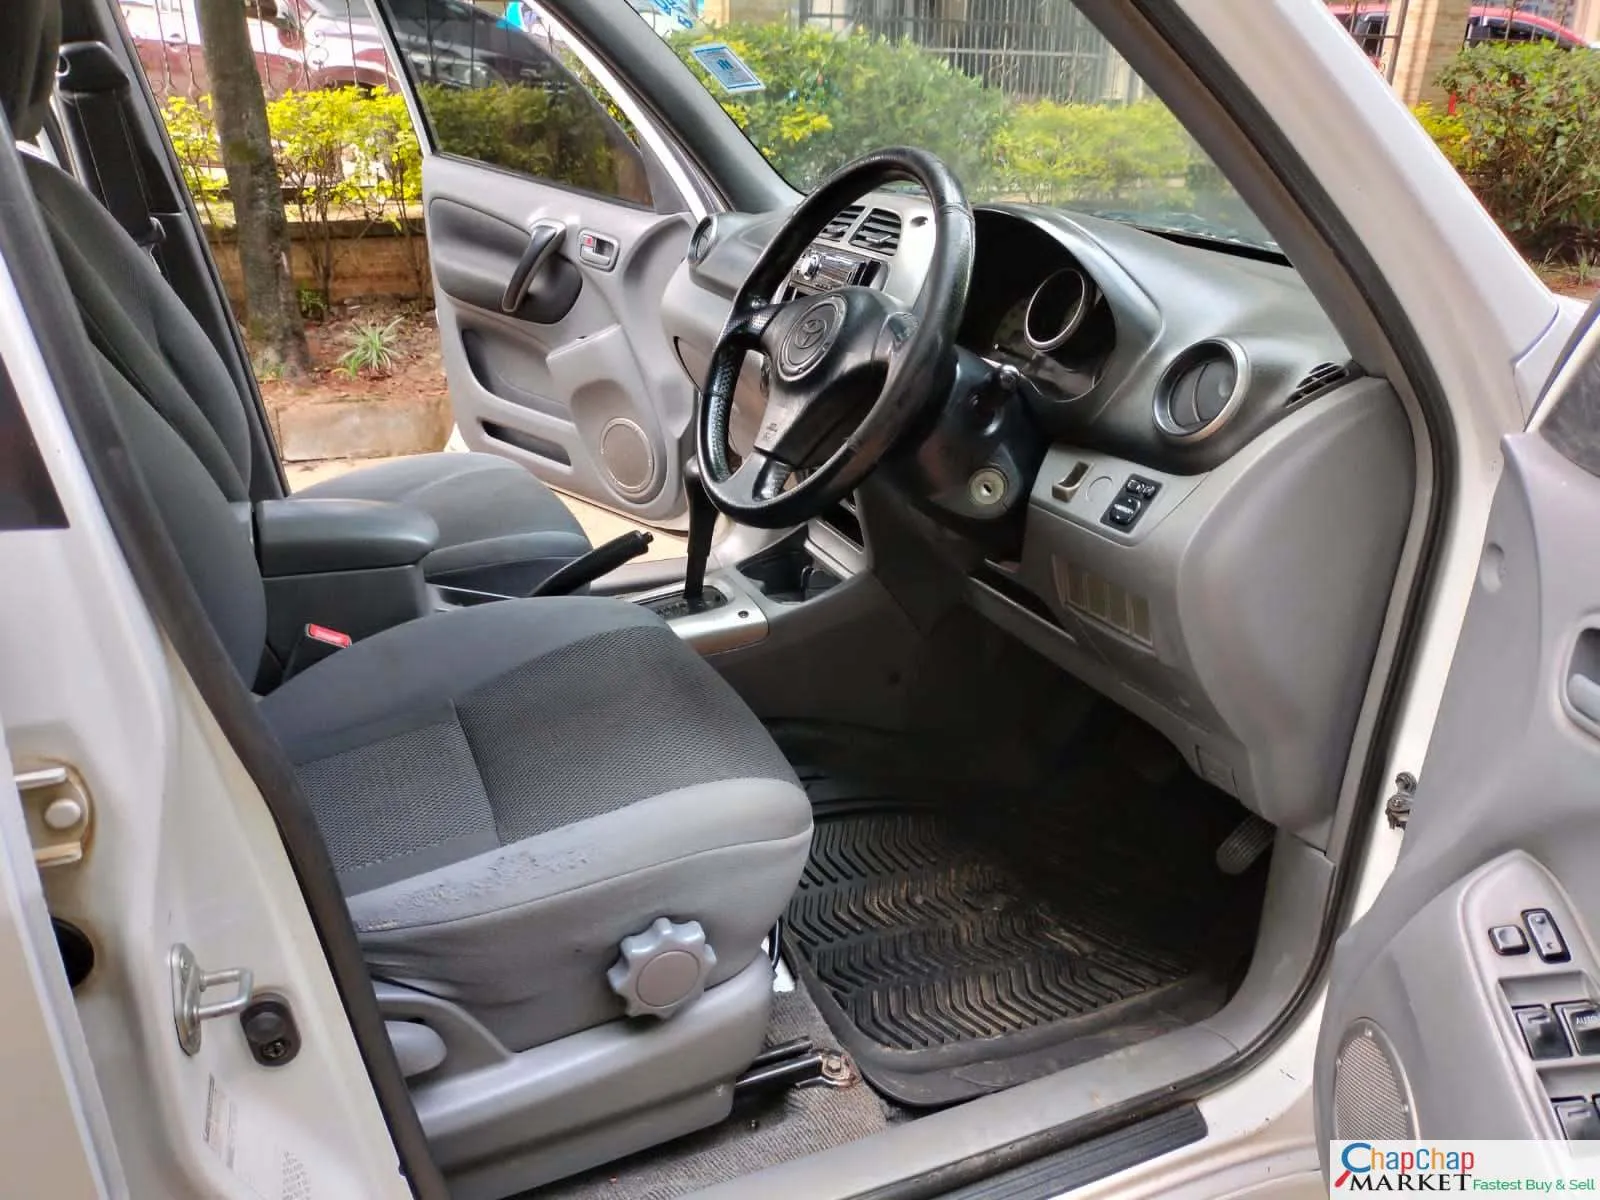 Toyota RAV4 Kenya CHEAPEST Toyota RAV4 for sale in kenya You Pay 30% Deposit HIRE PURCHASE installments Trade in OK EXCLUSIVE